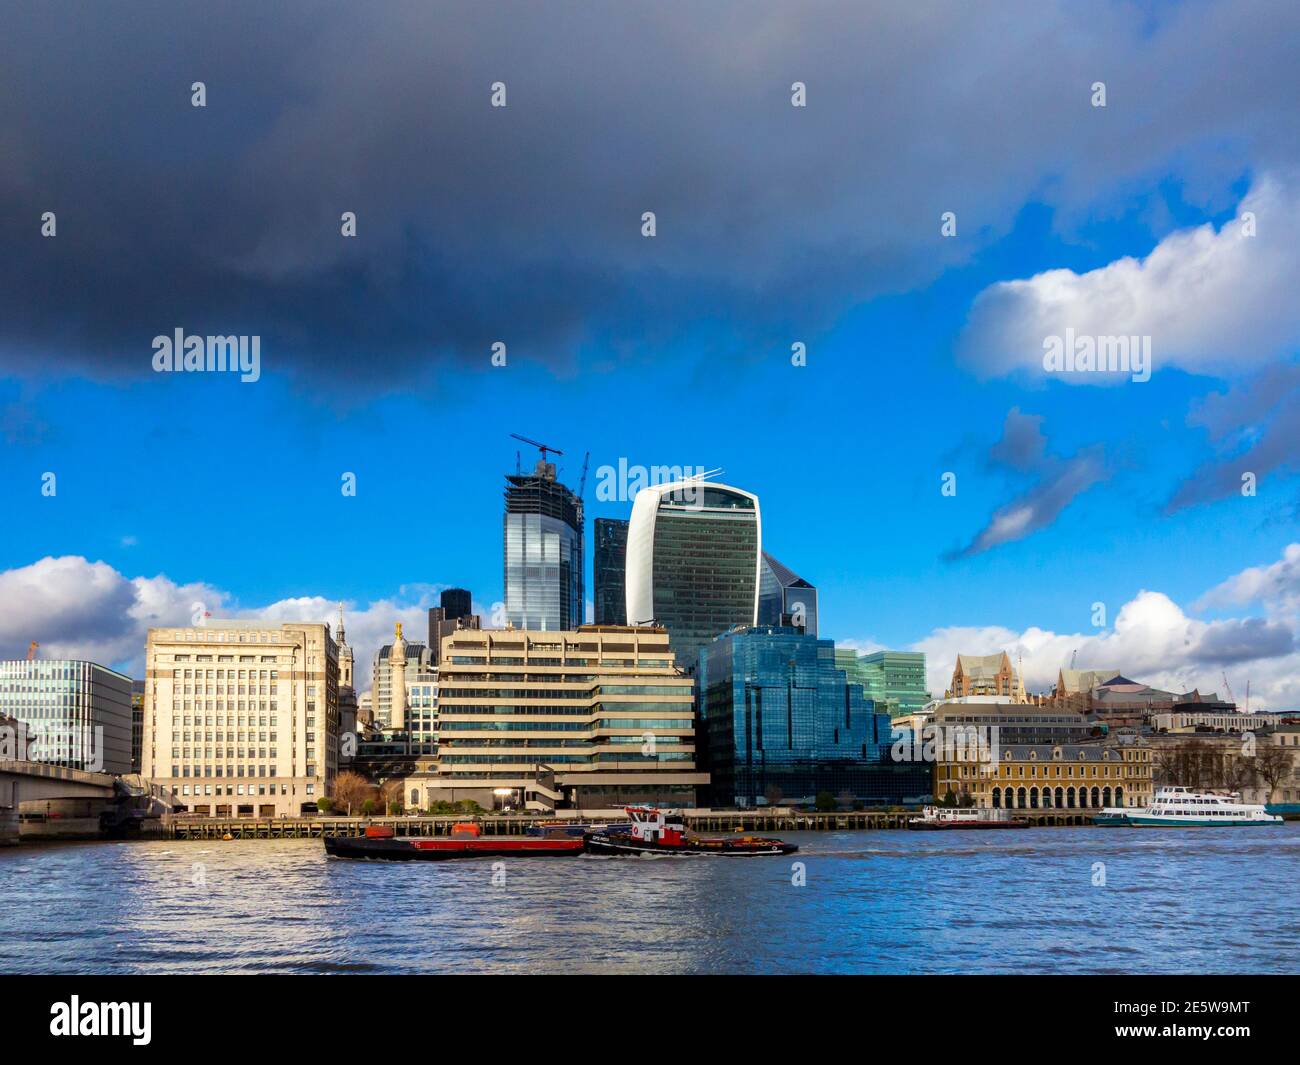 View of 20 Fenchurch Street or the Walkie Talkie office building designed by Rafael Vinoly in the City of London England UK with other offices nearby. Stock Photo